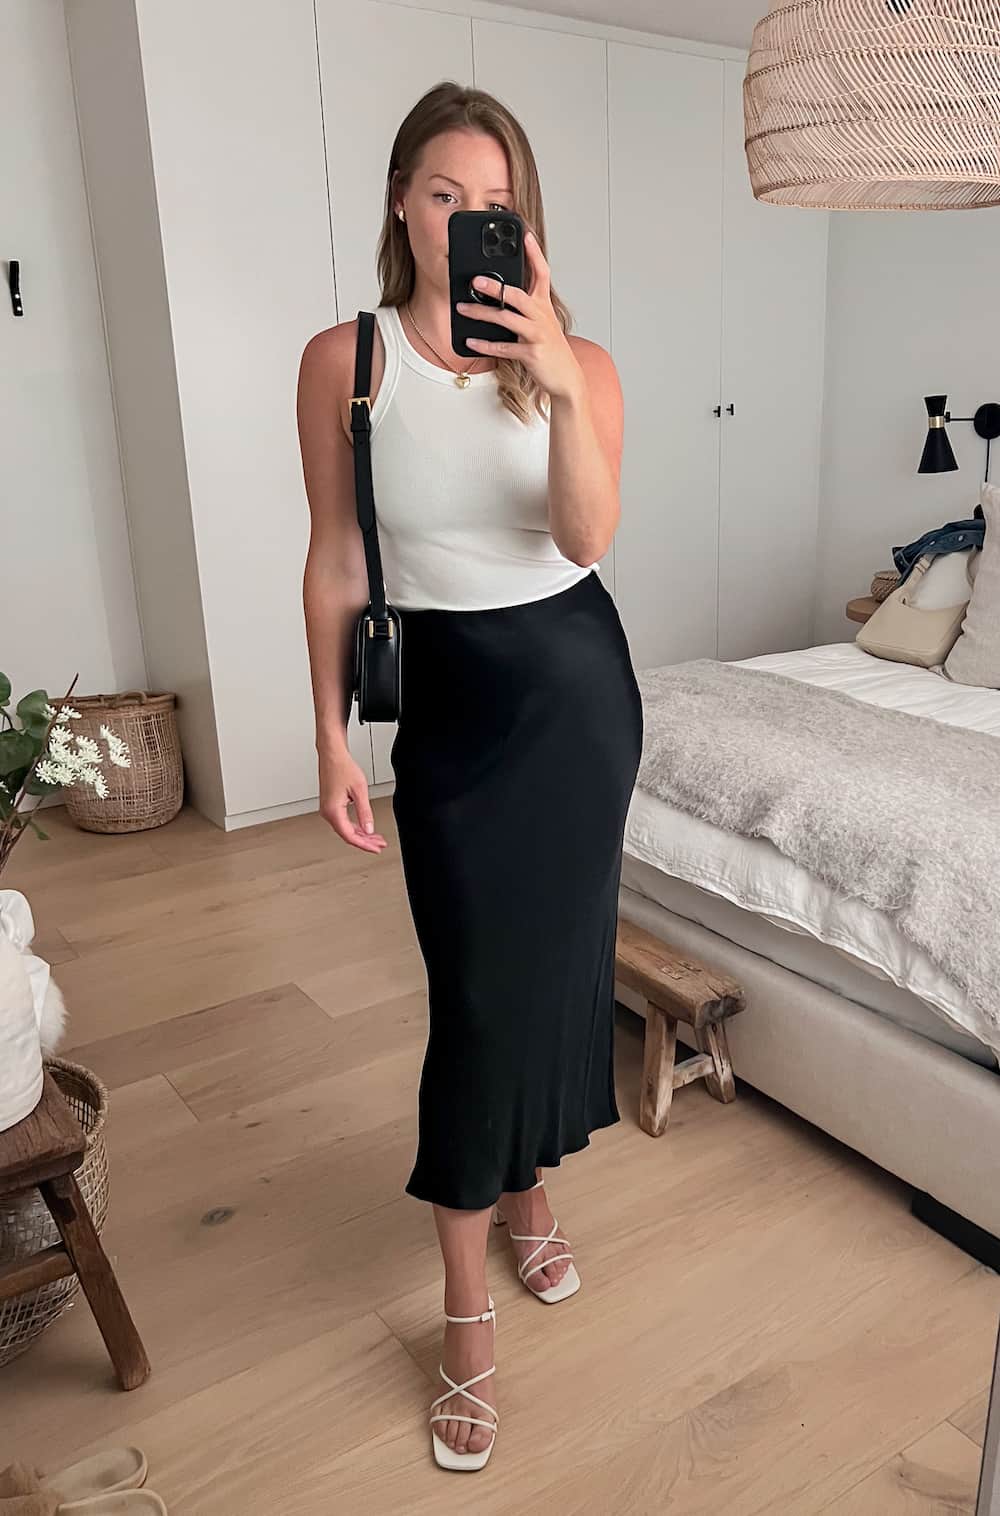 Christal wearing a black slip skirt with a white tank top and white strappy heels.